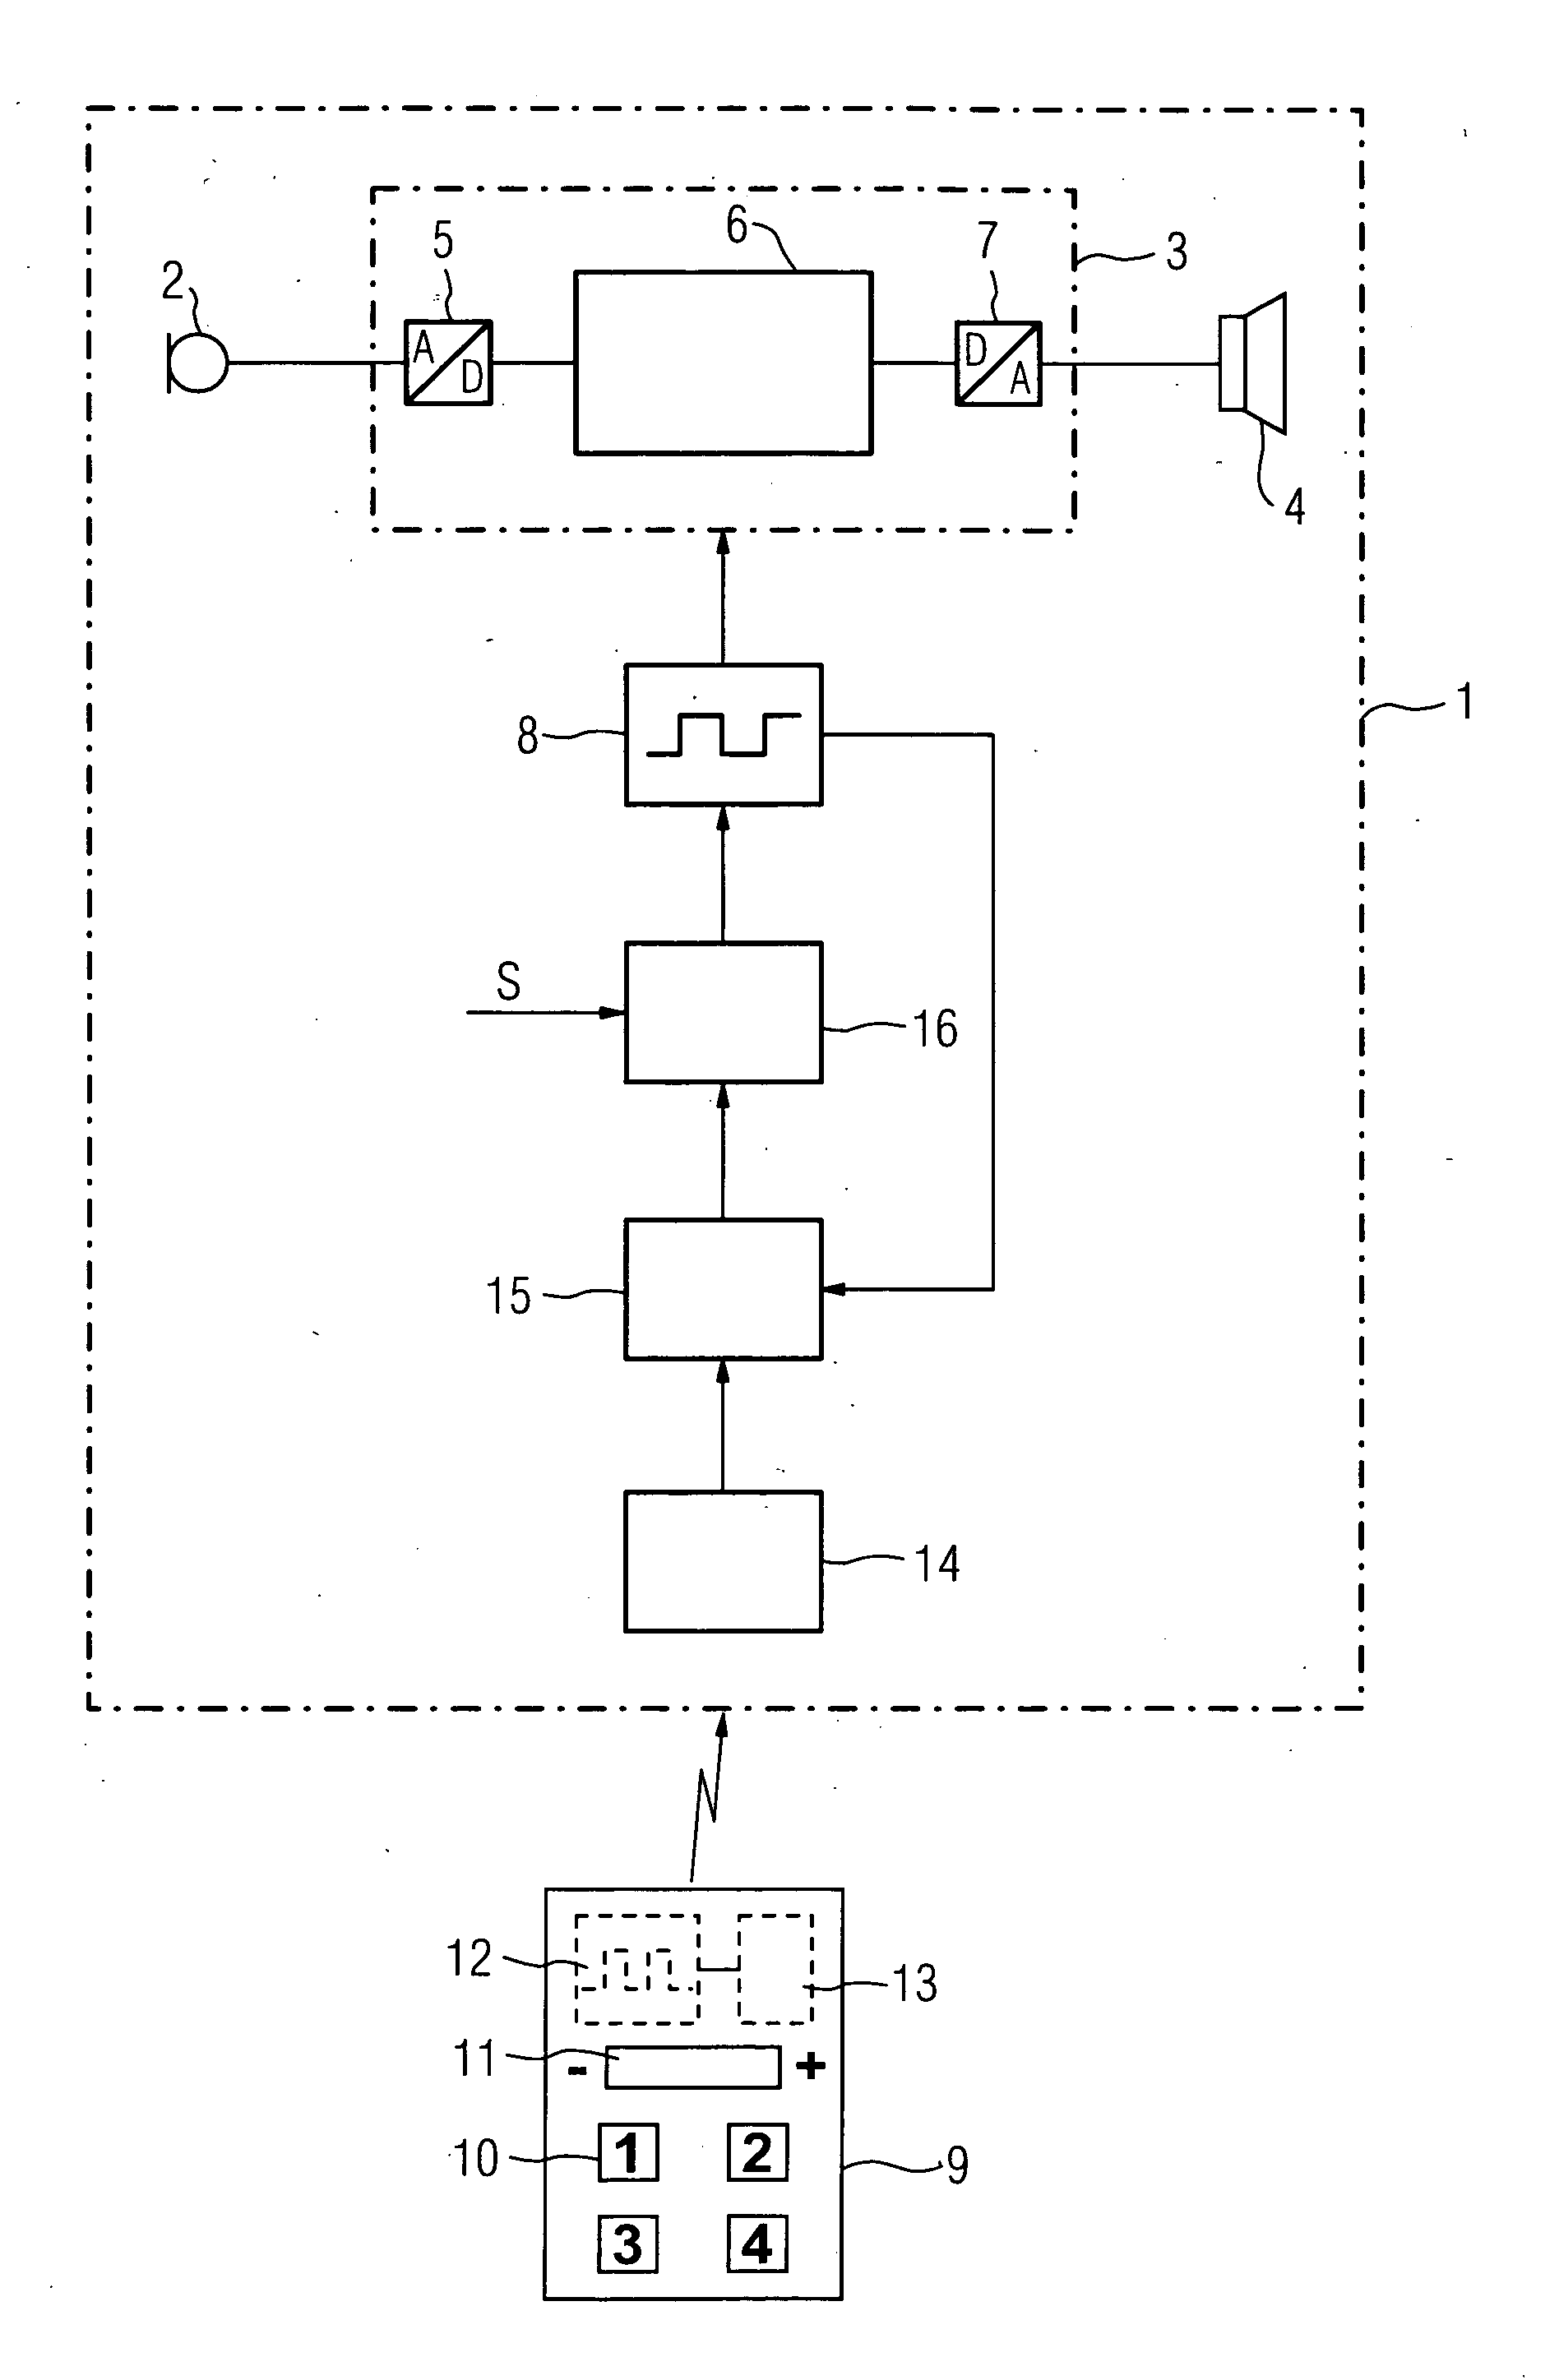 Stabilization of the system clock in a hearing aid